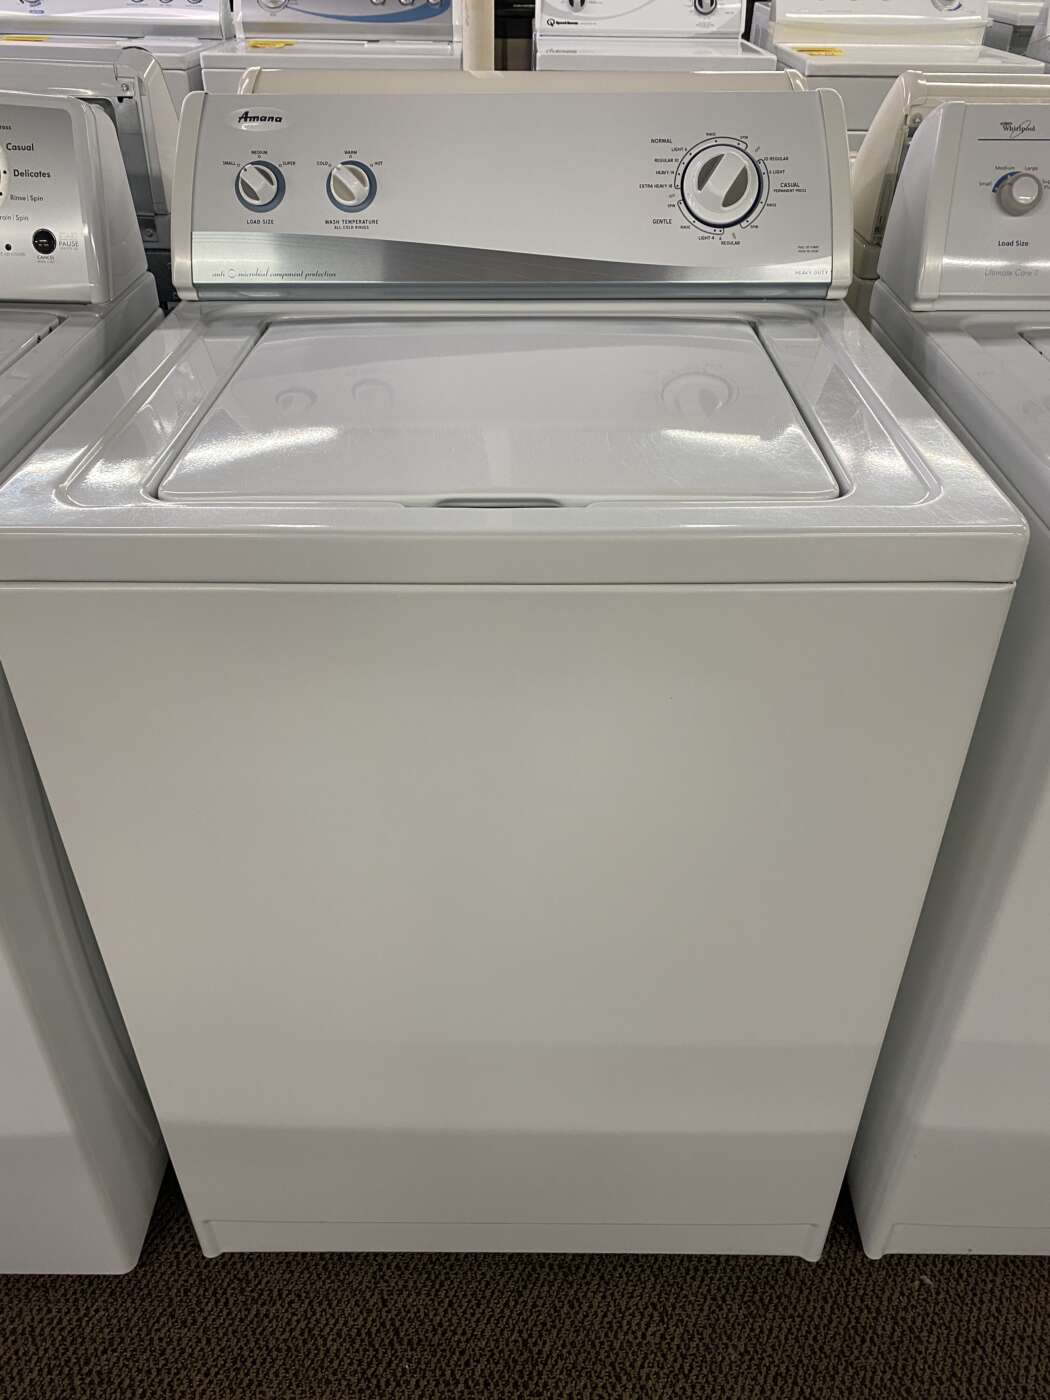 Reconditioned AMANA 3.2 Cu. Ft. Top-Load Washer – White